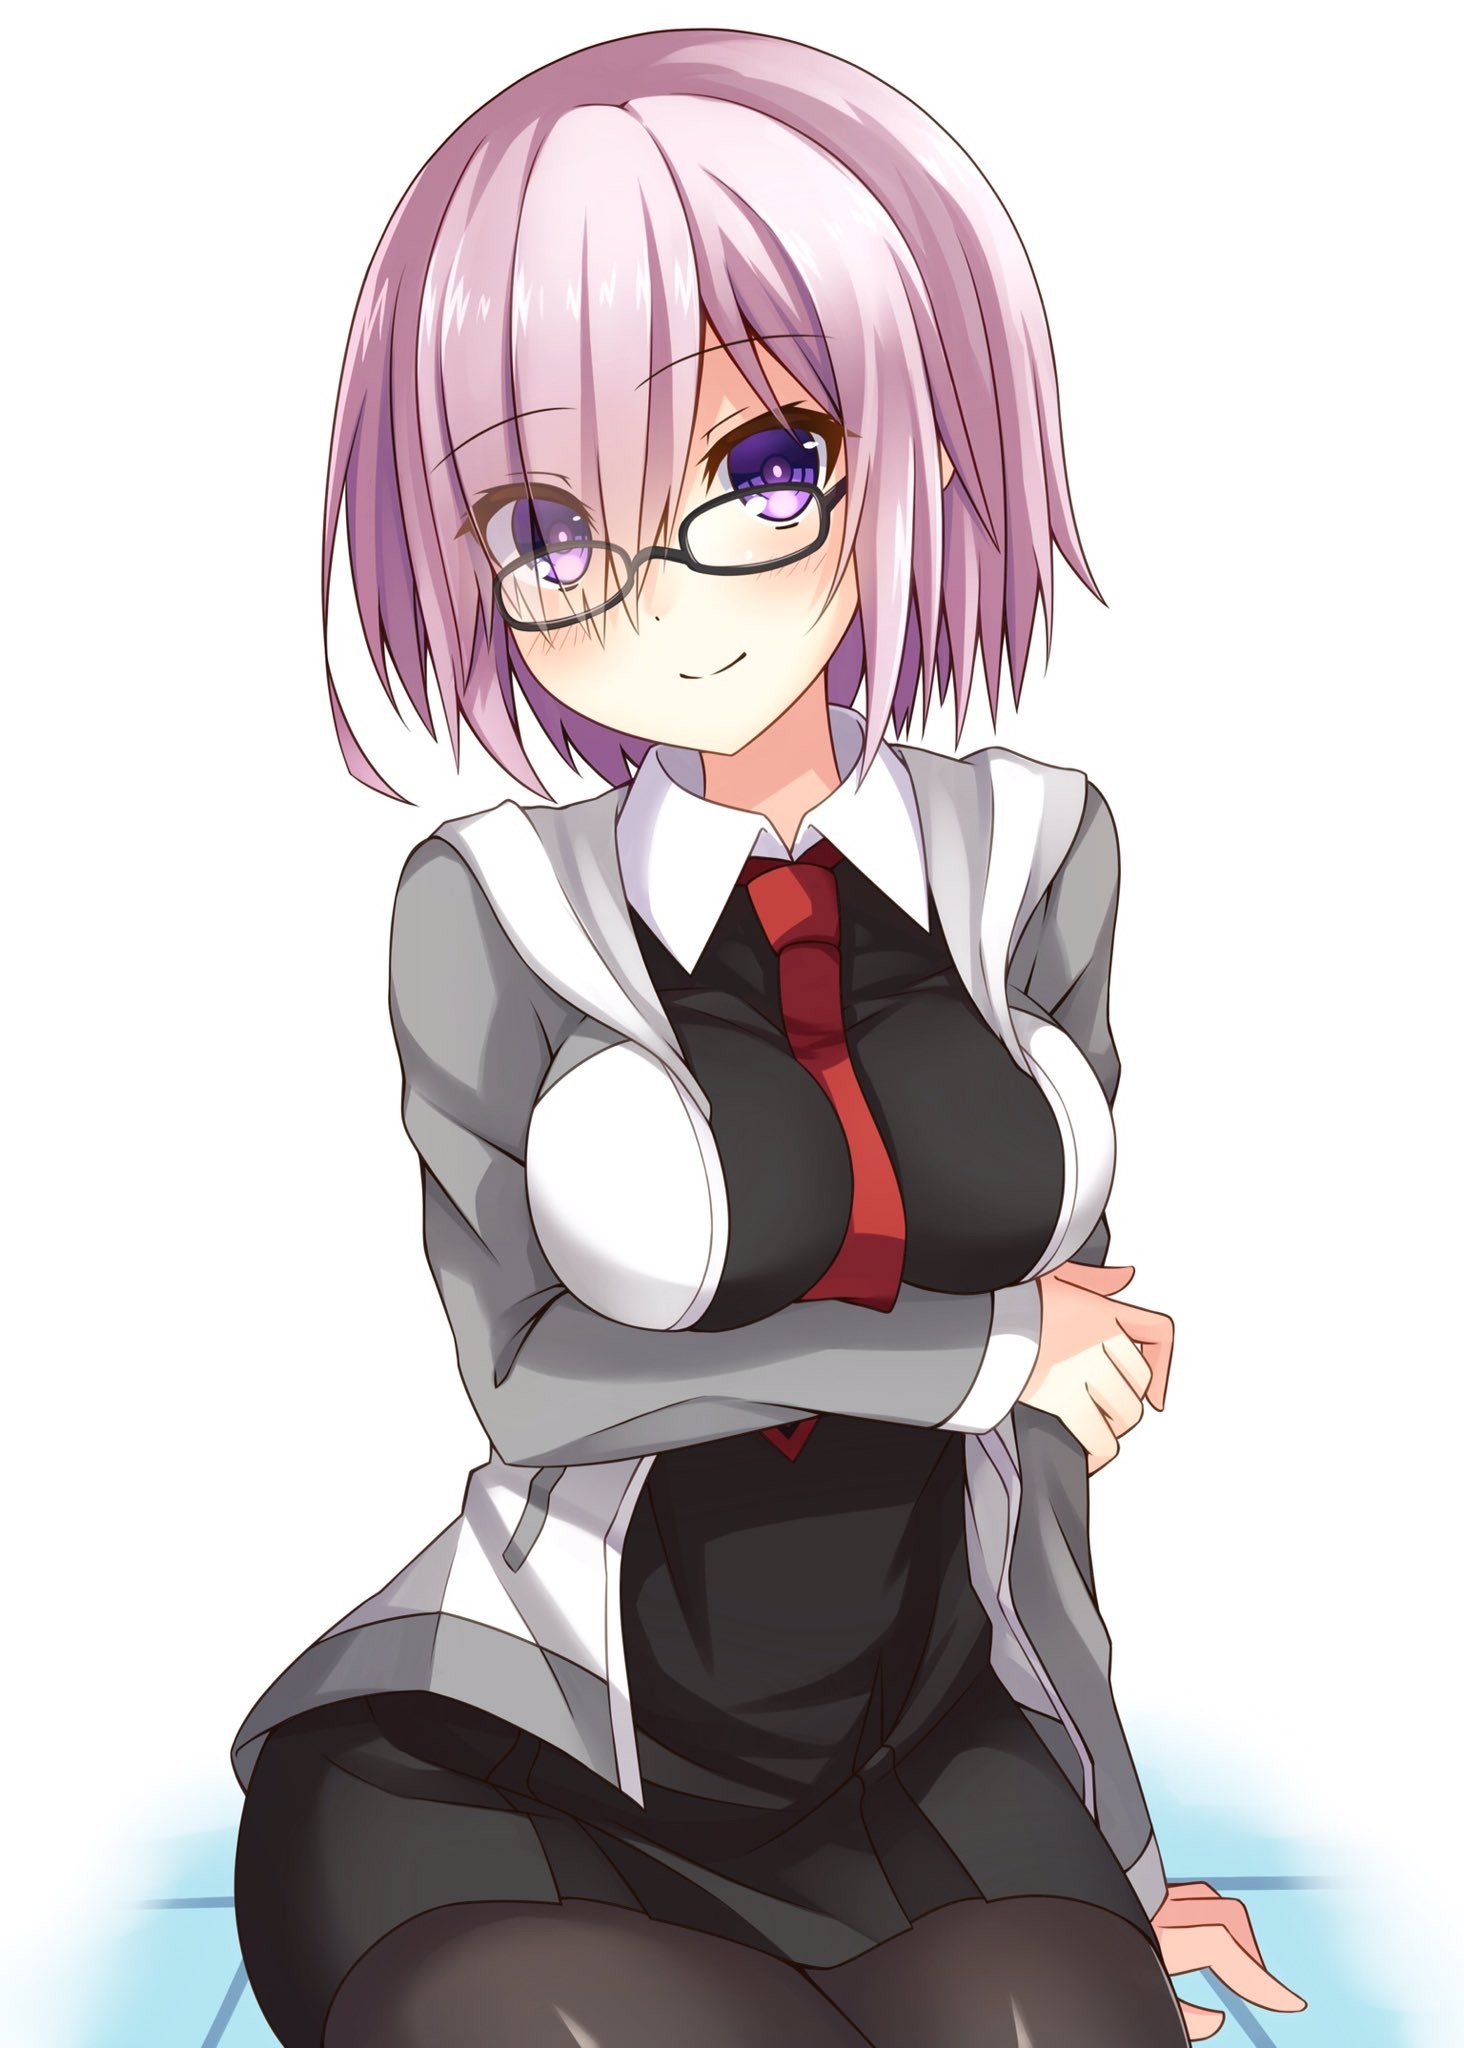 Anime 1464x2048 anime anime girls Fate/Grand Order Fate series Mash Kyrielight boobs tie pink hair women with glasses purple eyes sitting smiling white background simple background looking at viewer